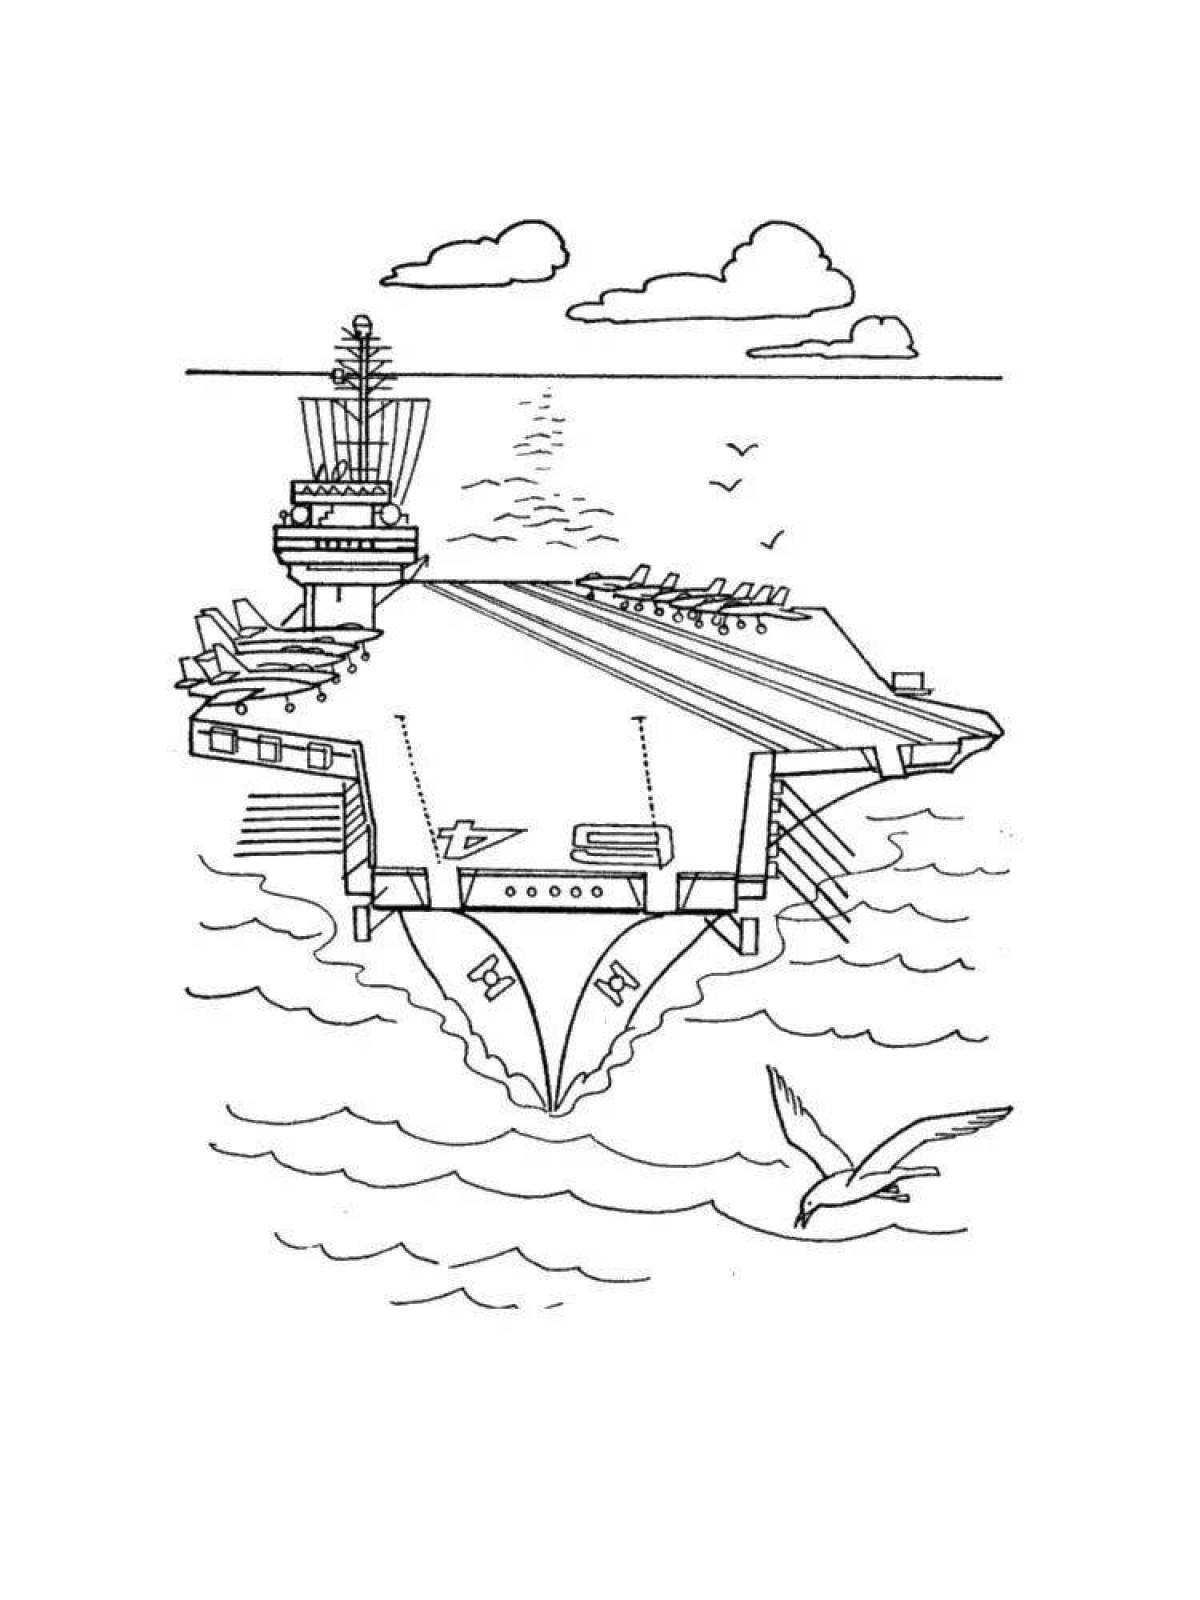 Aircraft carrier coloring page